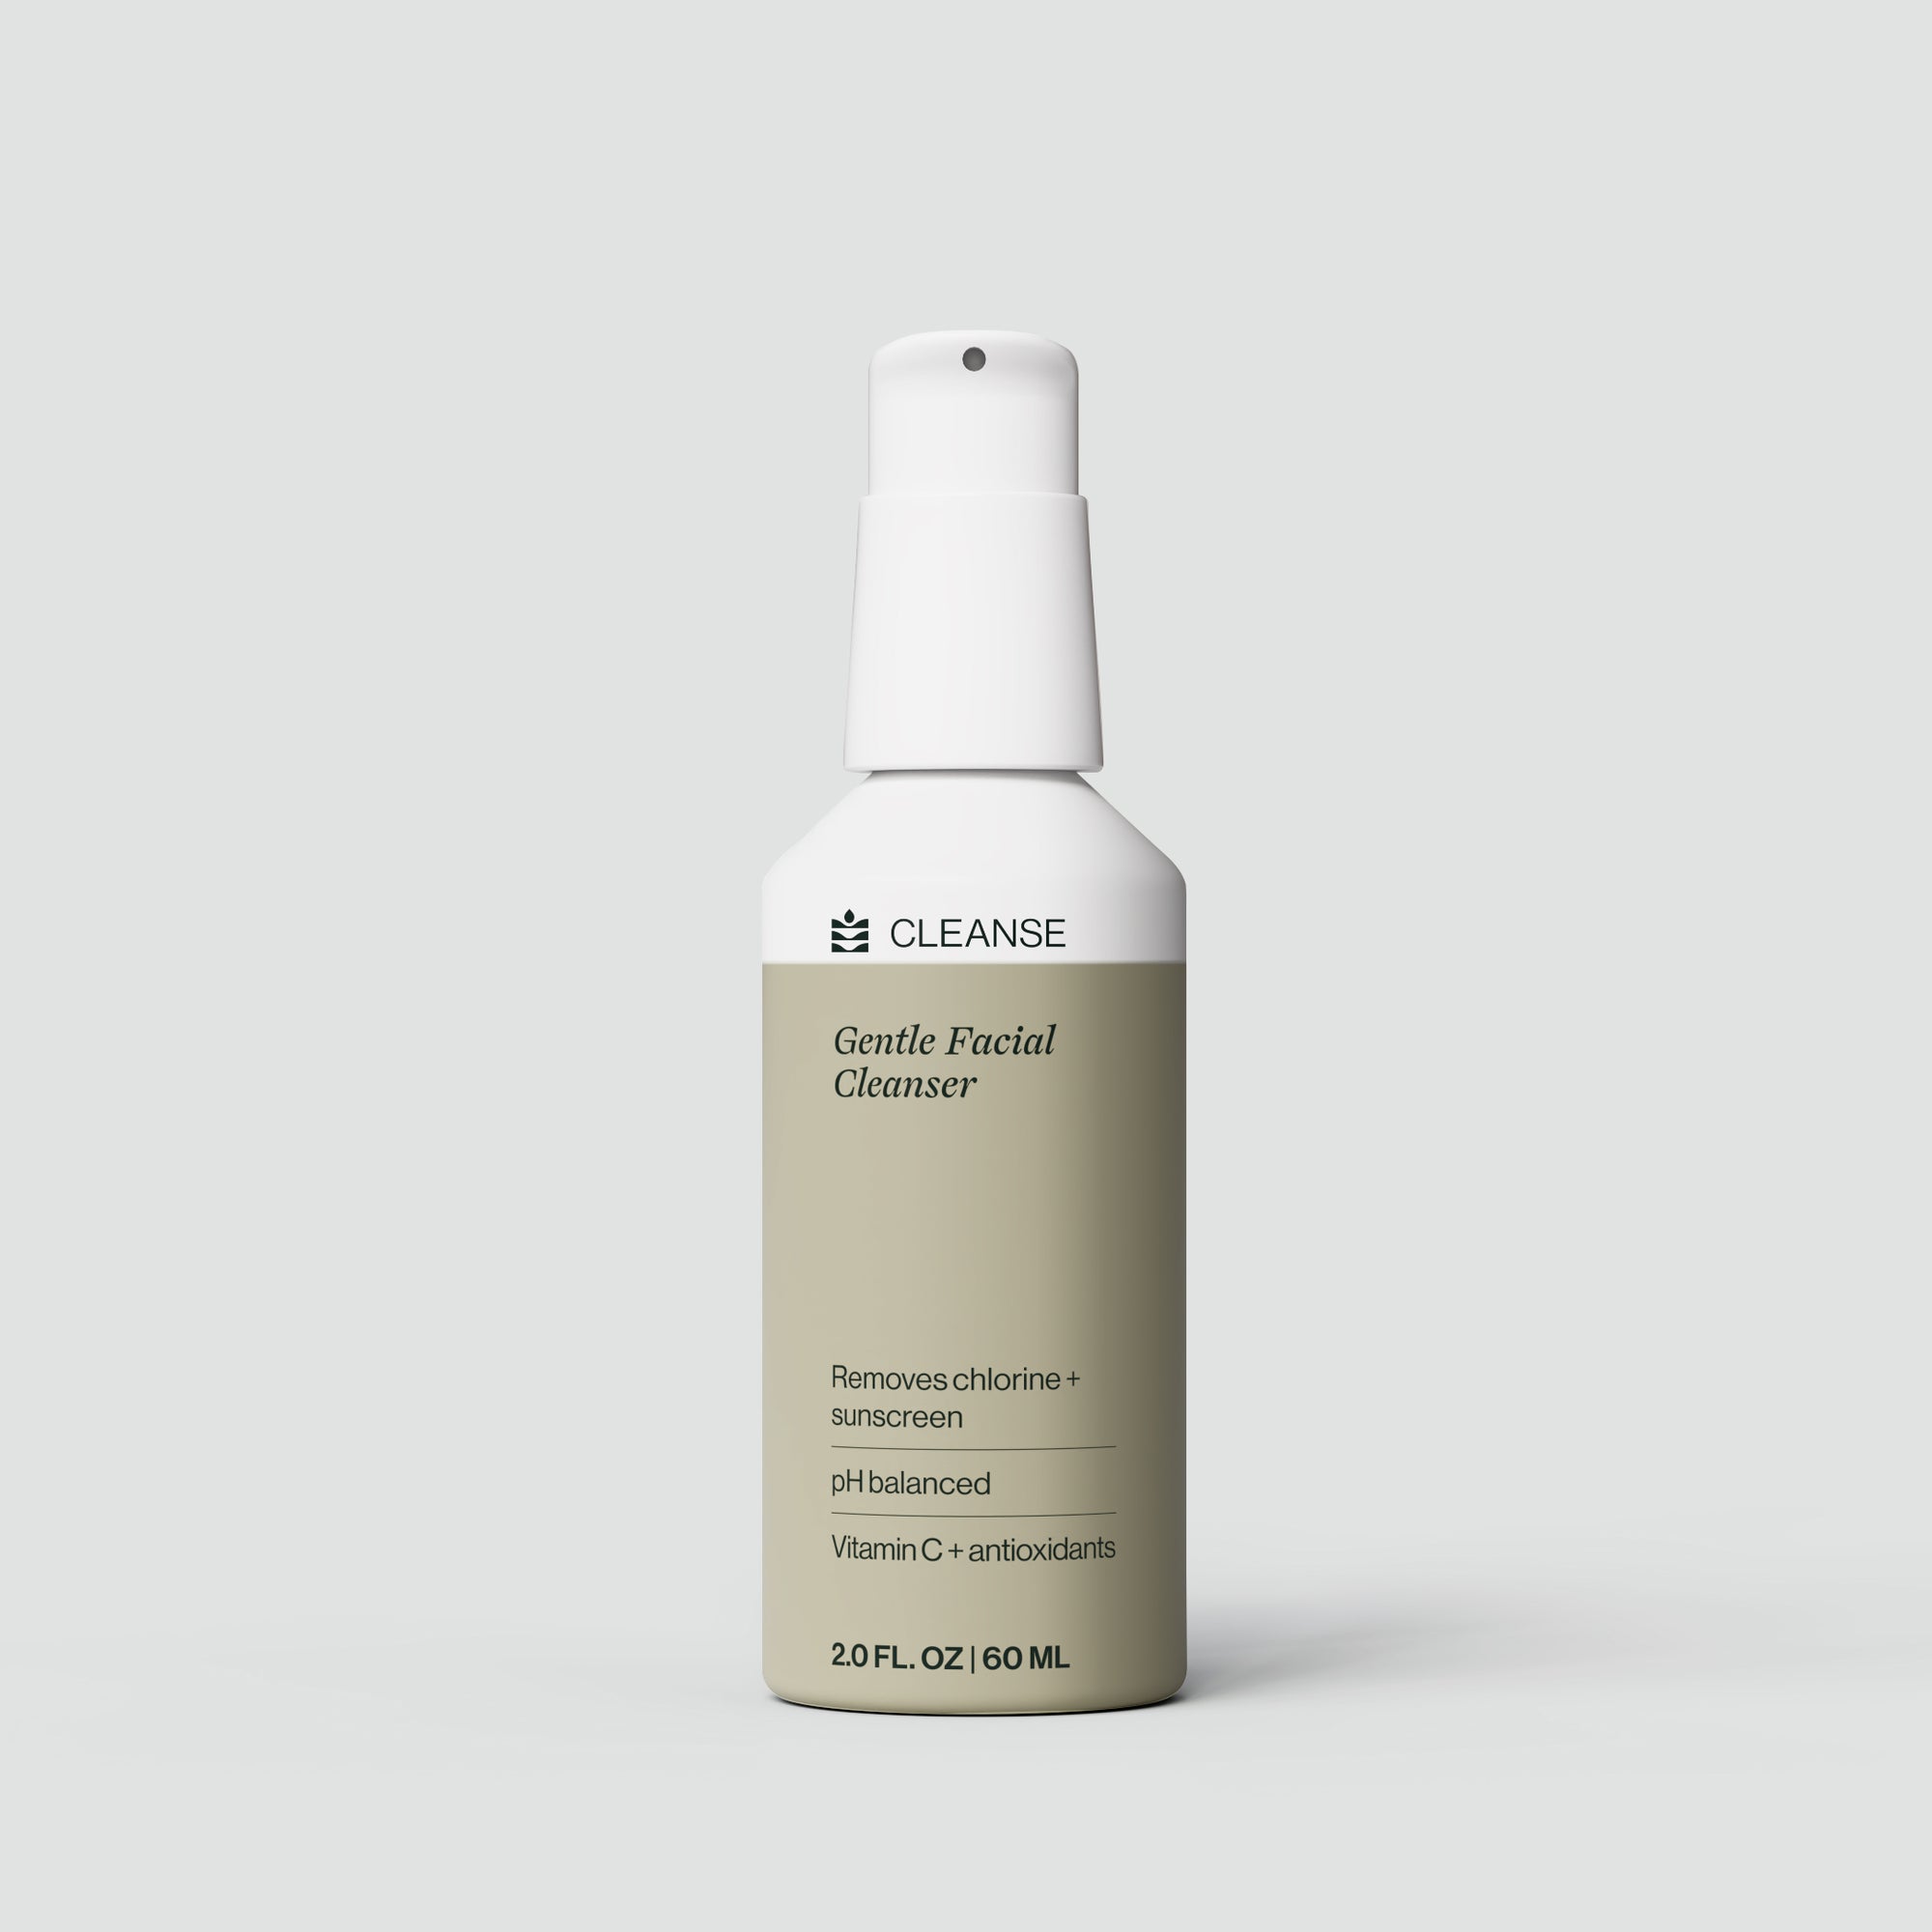 Dermasport's Gentle Facial Cleanser removes chlorine, sunscreen, and sweat without stripping to reduce dry skin and irritation. 